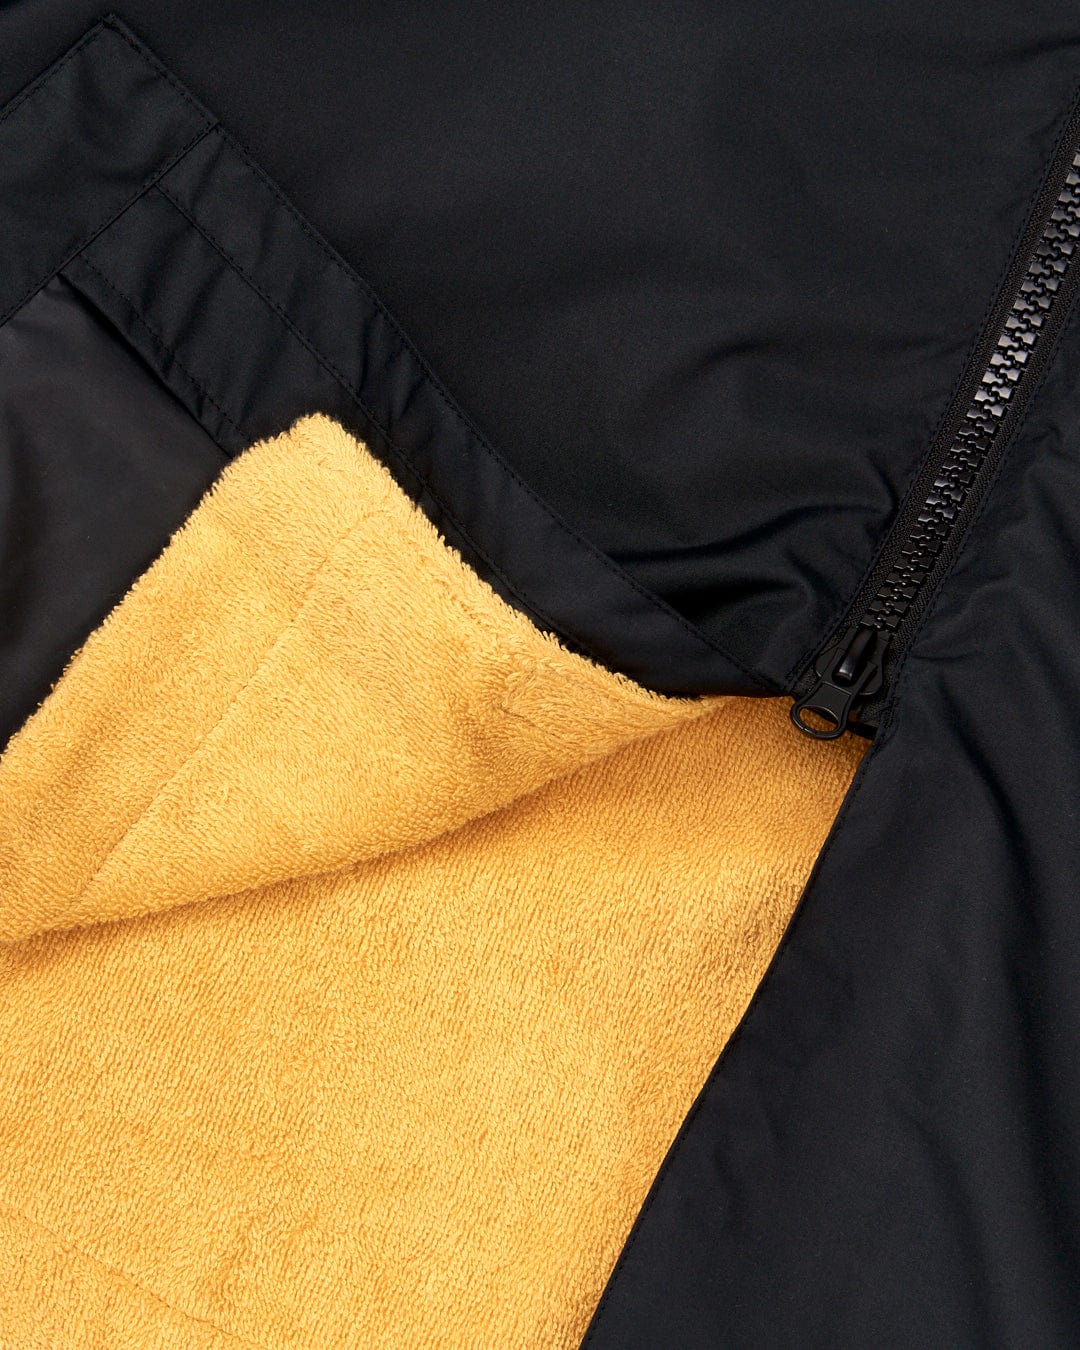 Close-up view of a Saltrock 3 in 1 Recycled Four Seasons Changing Robe - Black/Yellow with a zipper partially open, revealing the yellow towelling lining.